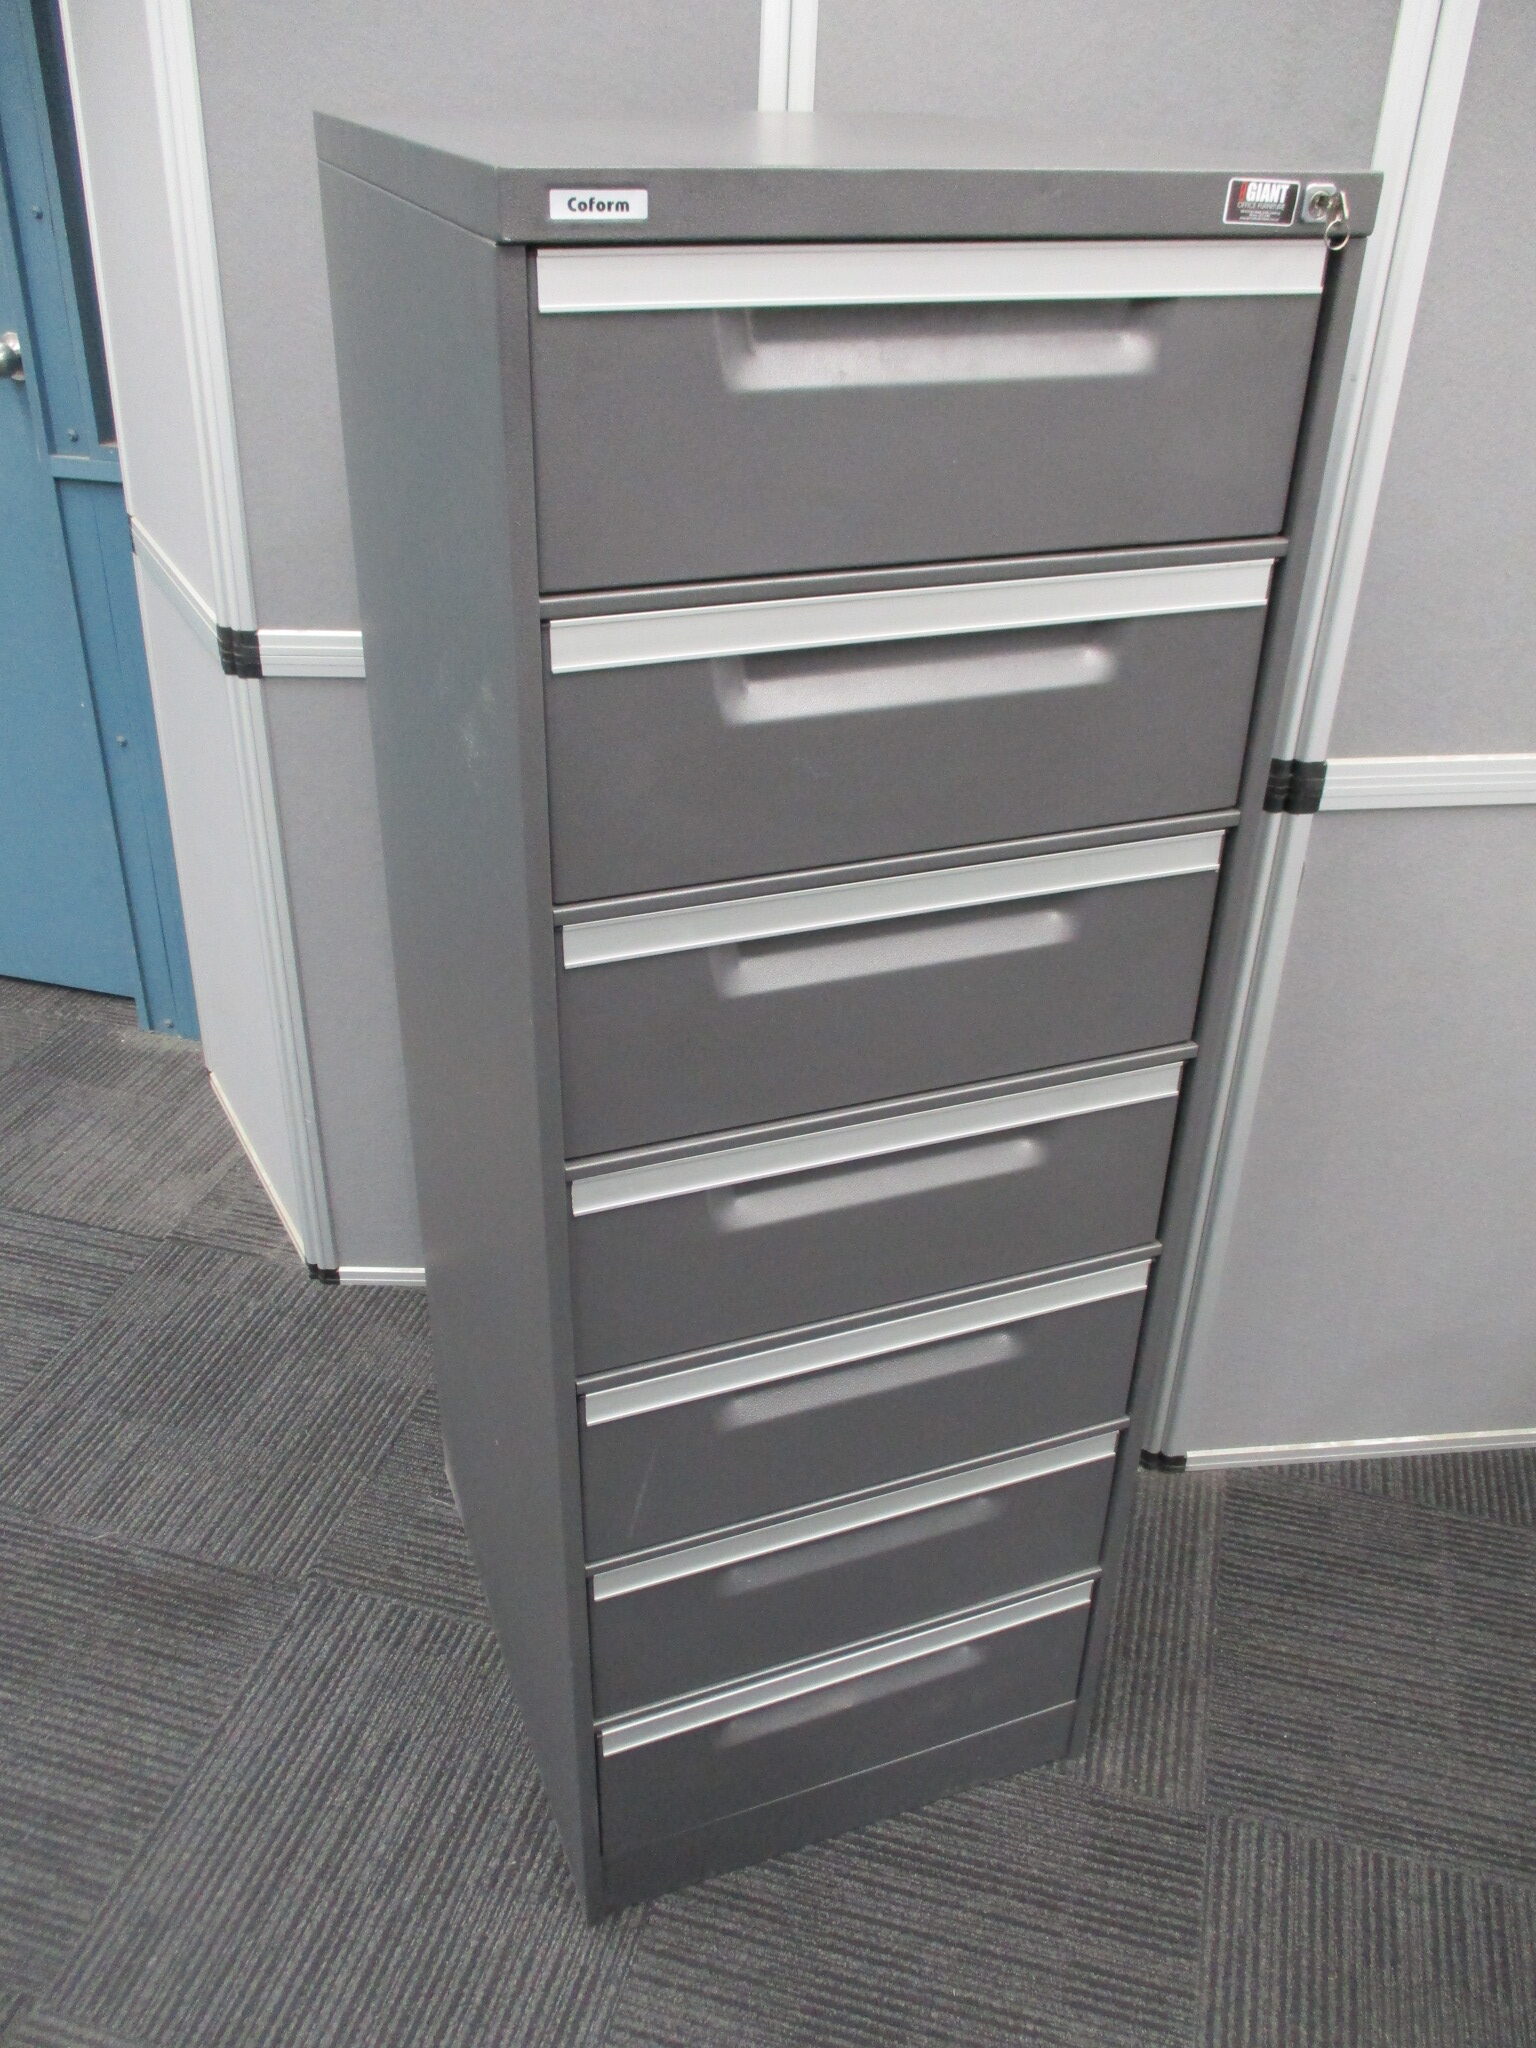 Coform 7 Drawer Card File Cabinets $675